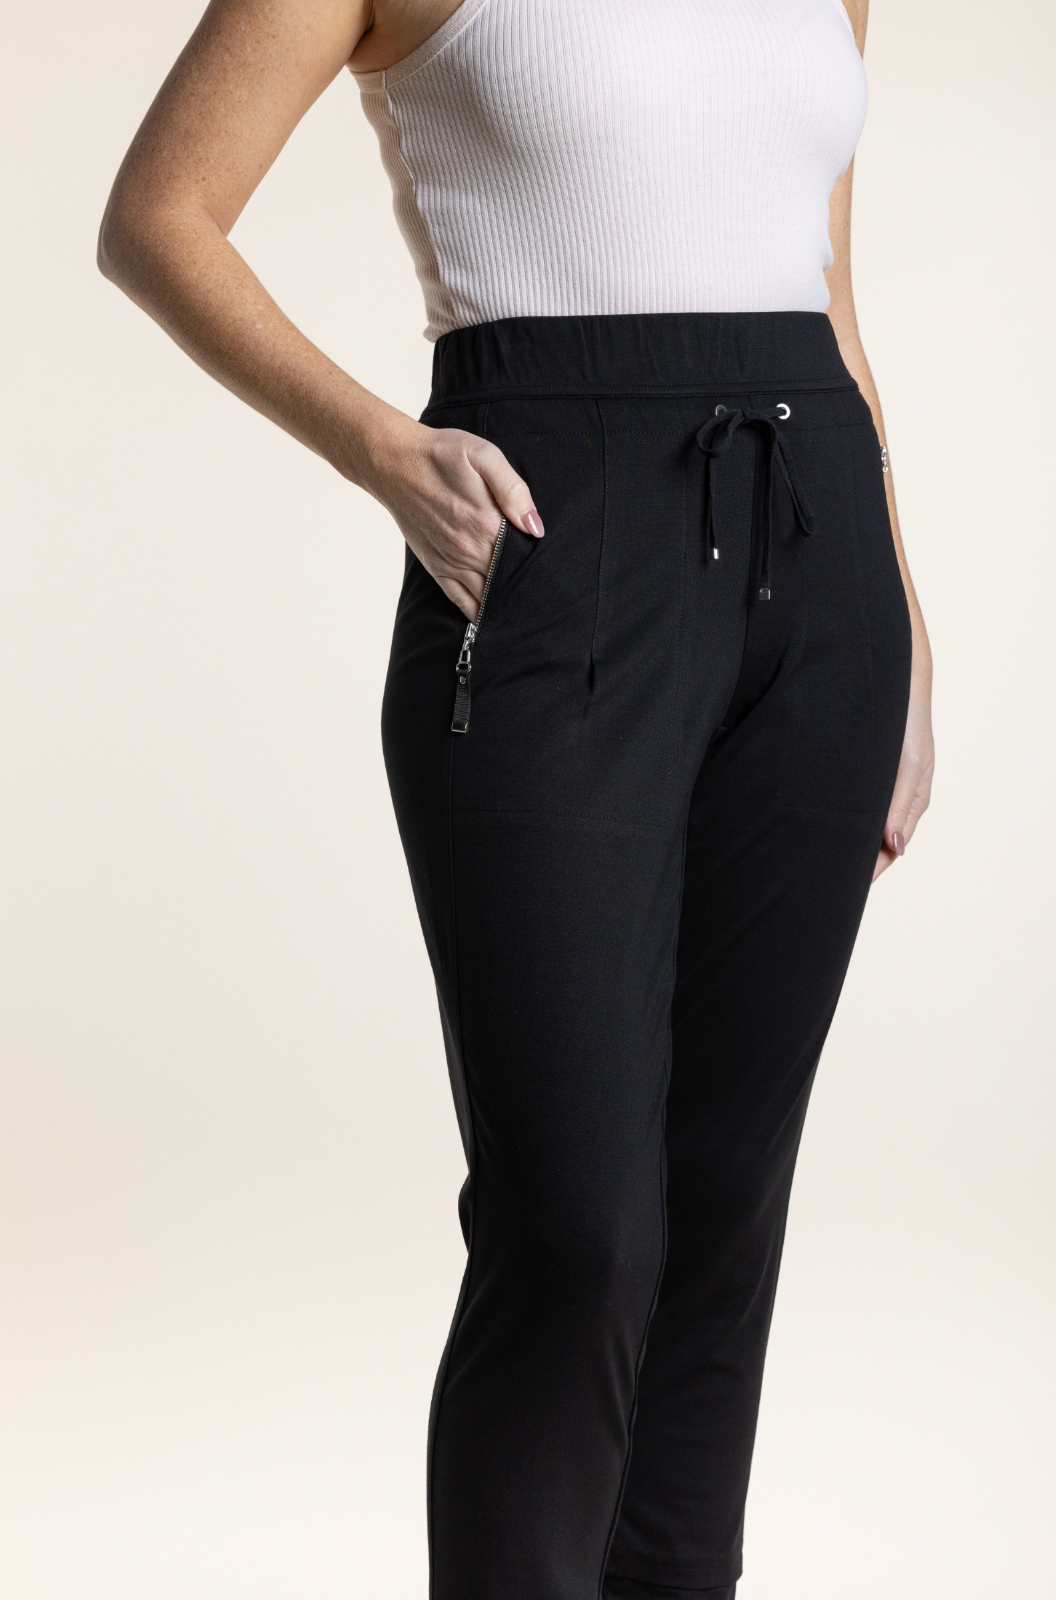 Two-T's Clothing Zip Panel Pant in Black